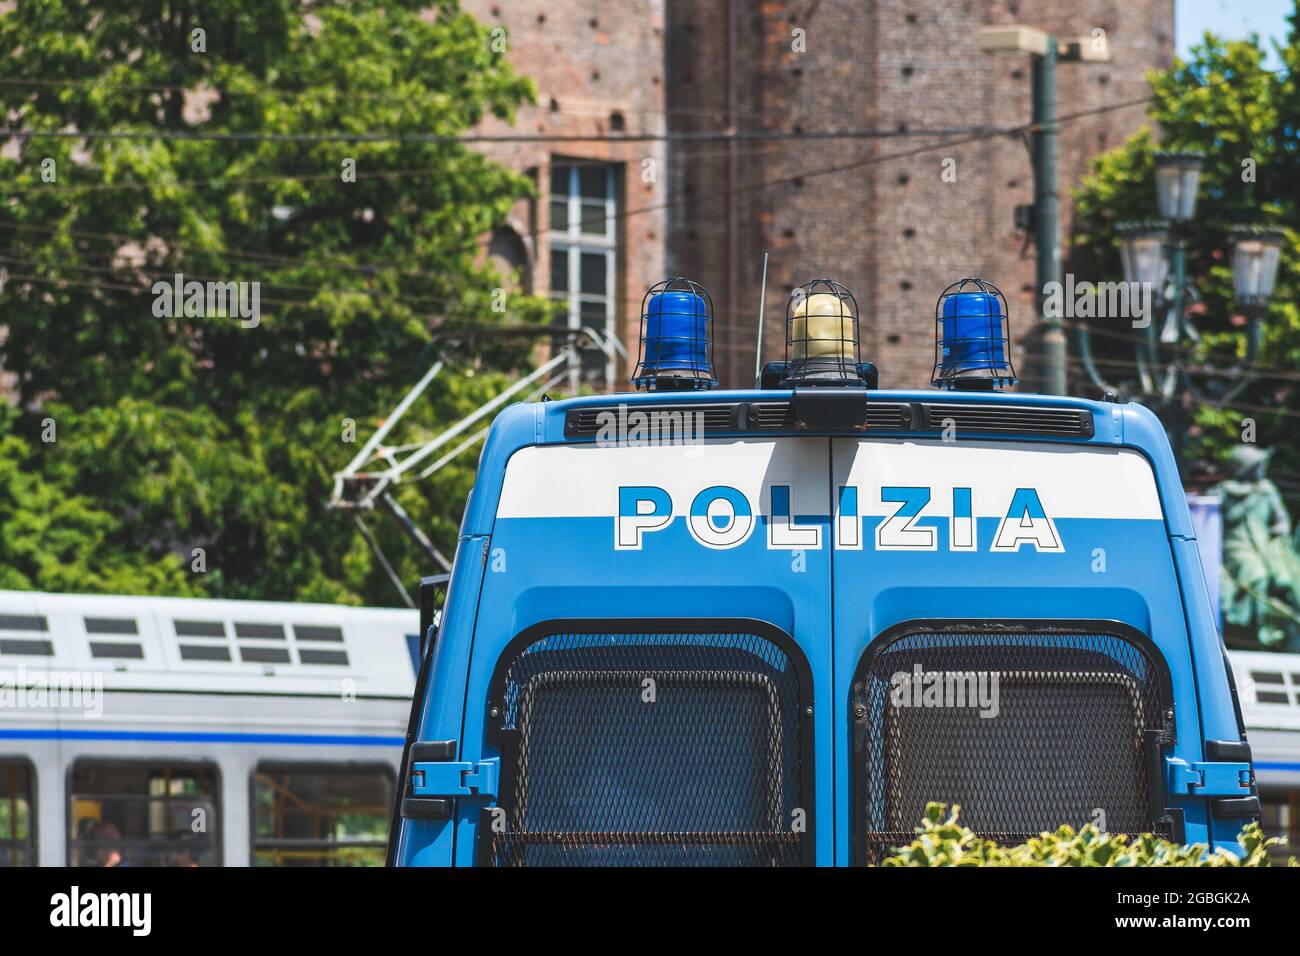 Armored Italian police truck or car in the square during a demonstration Stock Photo